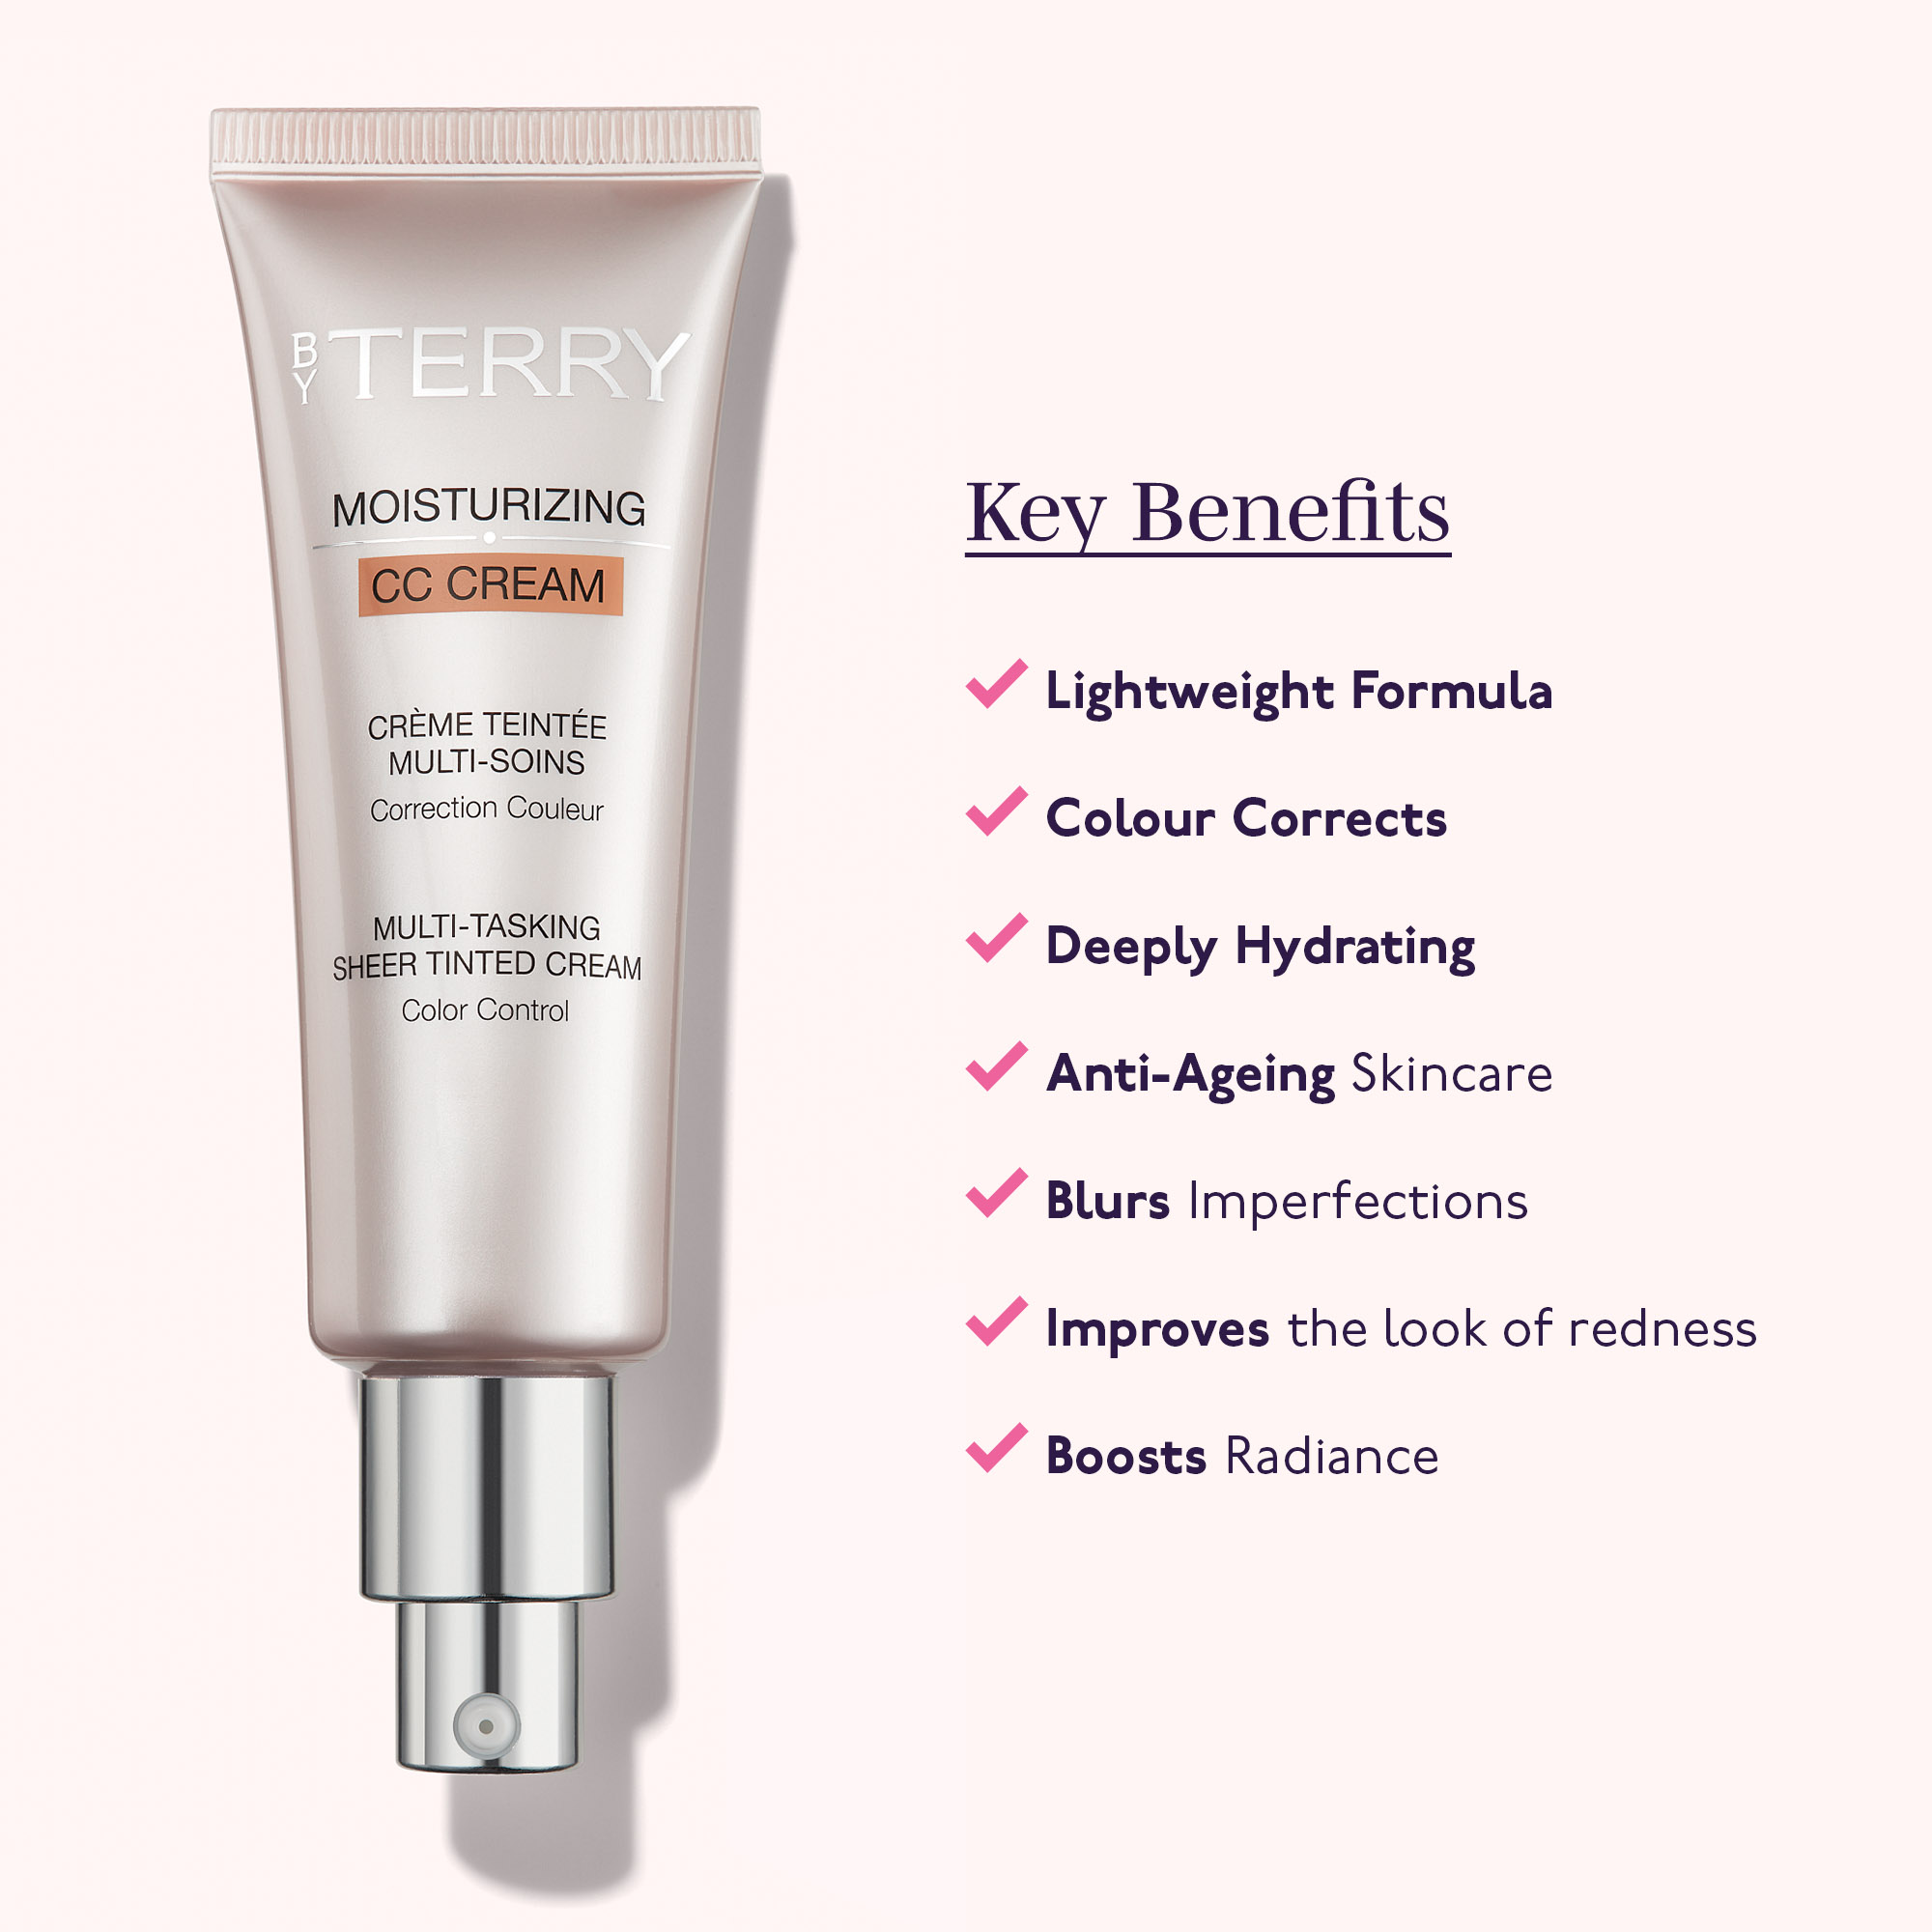 Key Benefits. Lightweight Formula, Colour Corrects, Deeply Hydrating, Anti-Ageing Skincare, Blurs Imperfections, Improves the look of redness, Boosts radiance